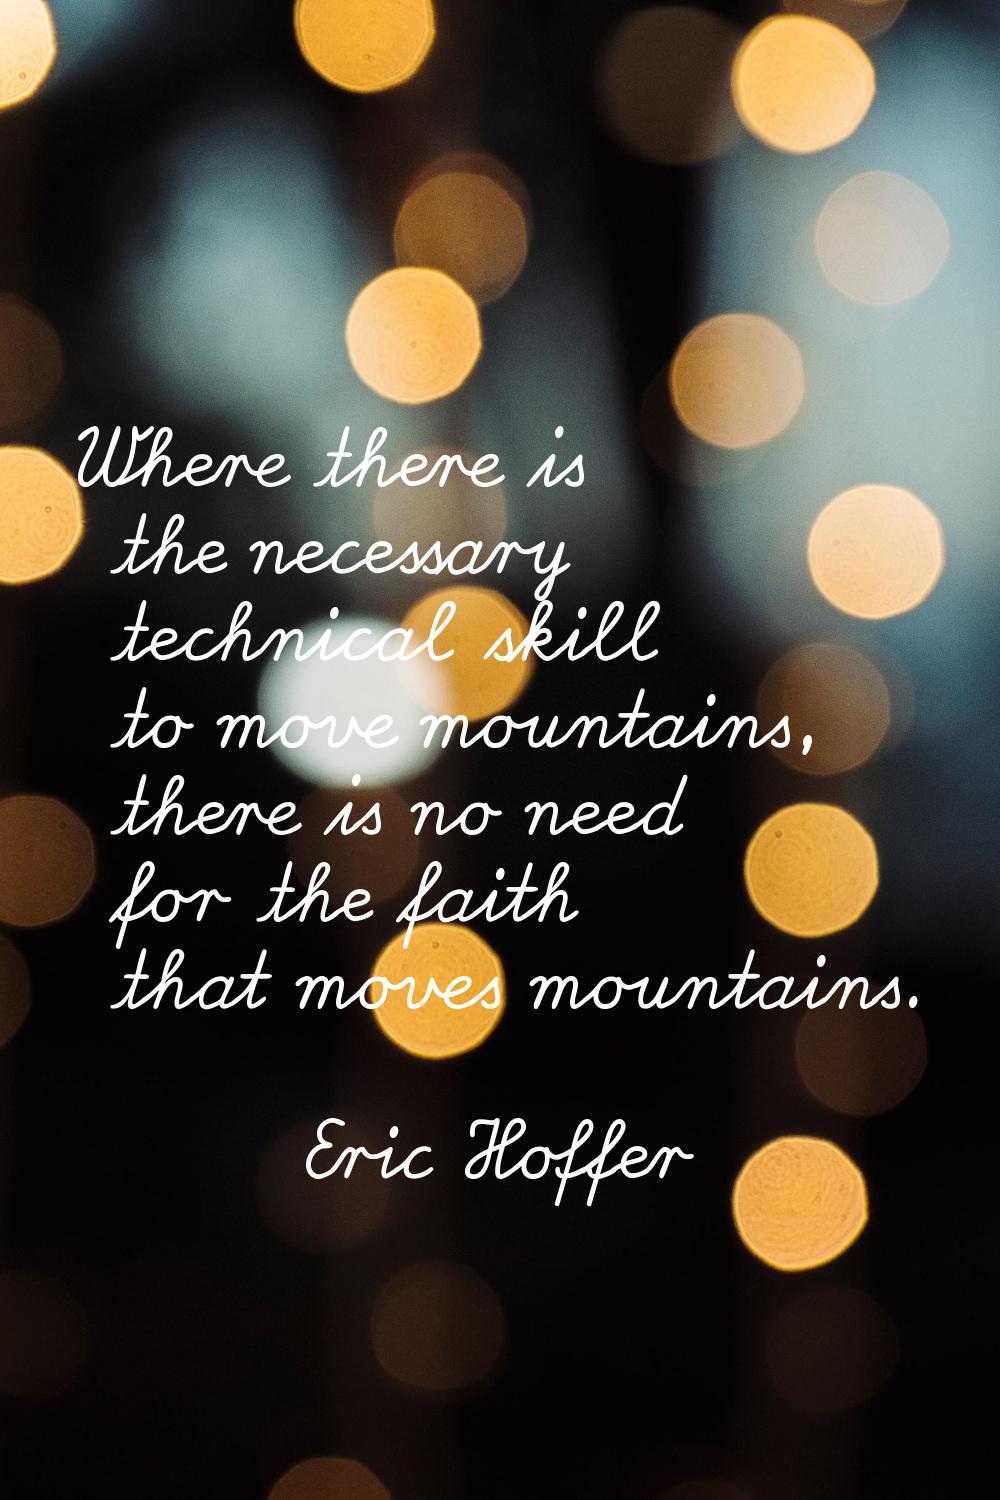 Where there is the necessary technical skill to move mountains, there is no need for the faith that